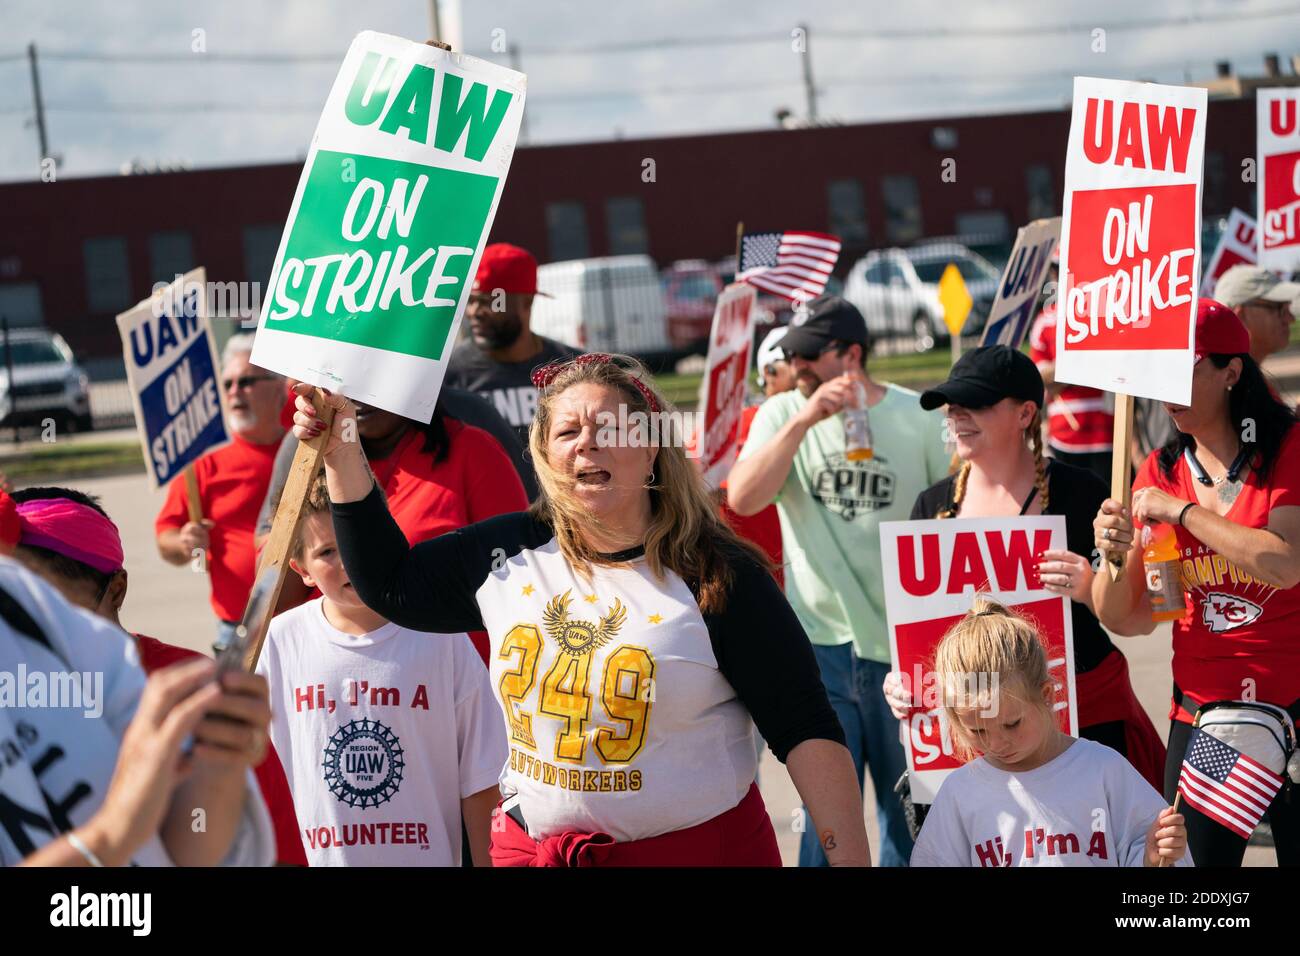 KANSAS CITY, KS, USA - 22 September 2019 - Joe Biden supporters listen to Joe Biden speaking during his visit to support a UAW (United Allied Workers Stock Photo